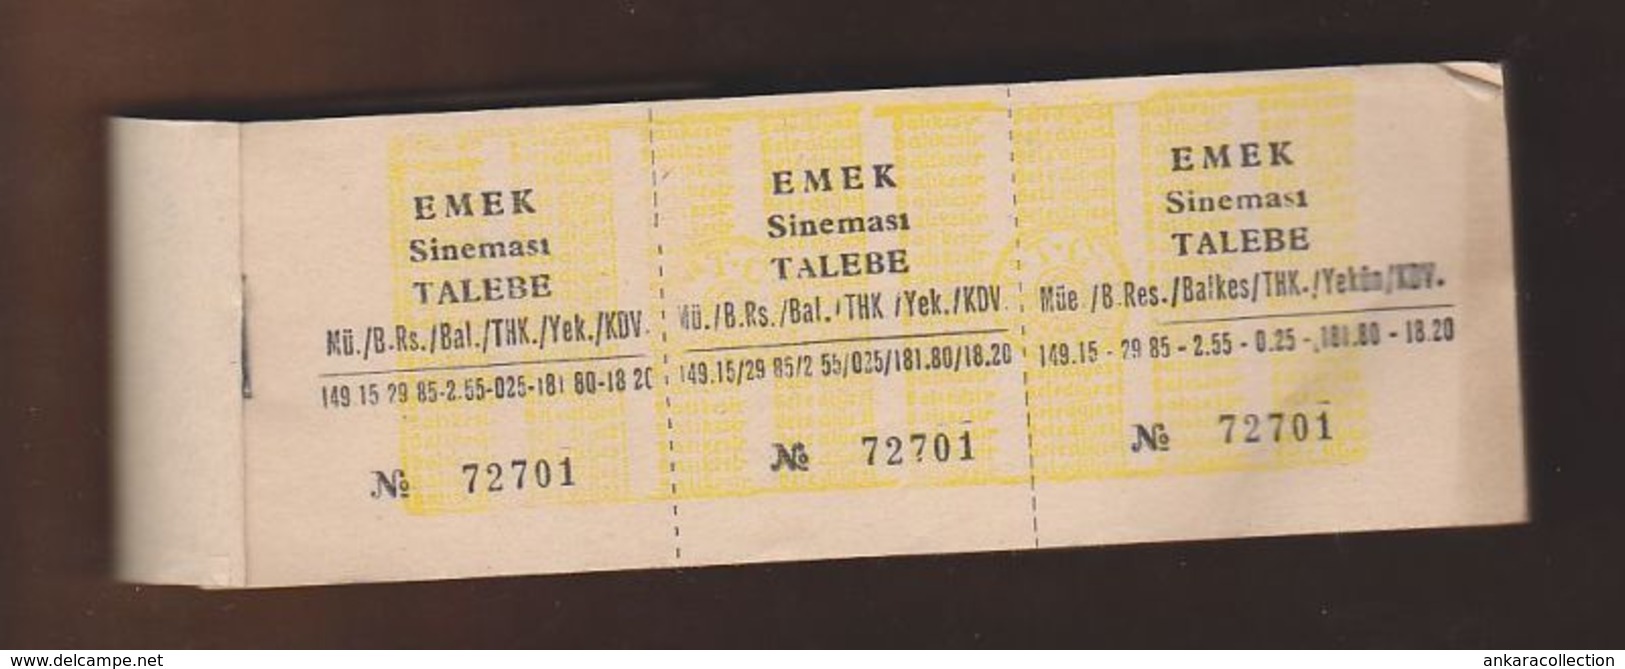 AC - EMEK CINEMA 100 PIECES UNUSED TICKETS WITH COUNTERFOILS 72701 - 72800 FOR STUDENT BALIKESIR, TURKEY - Concert Tickets